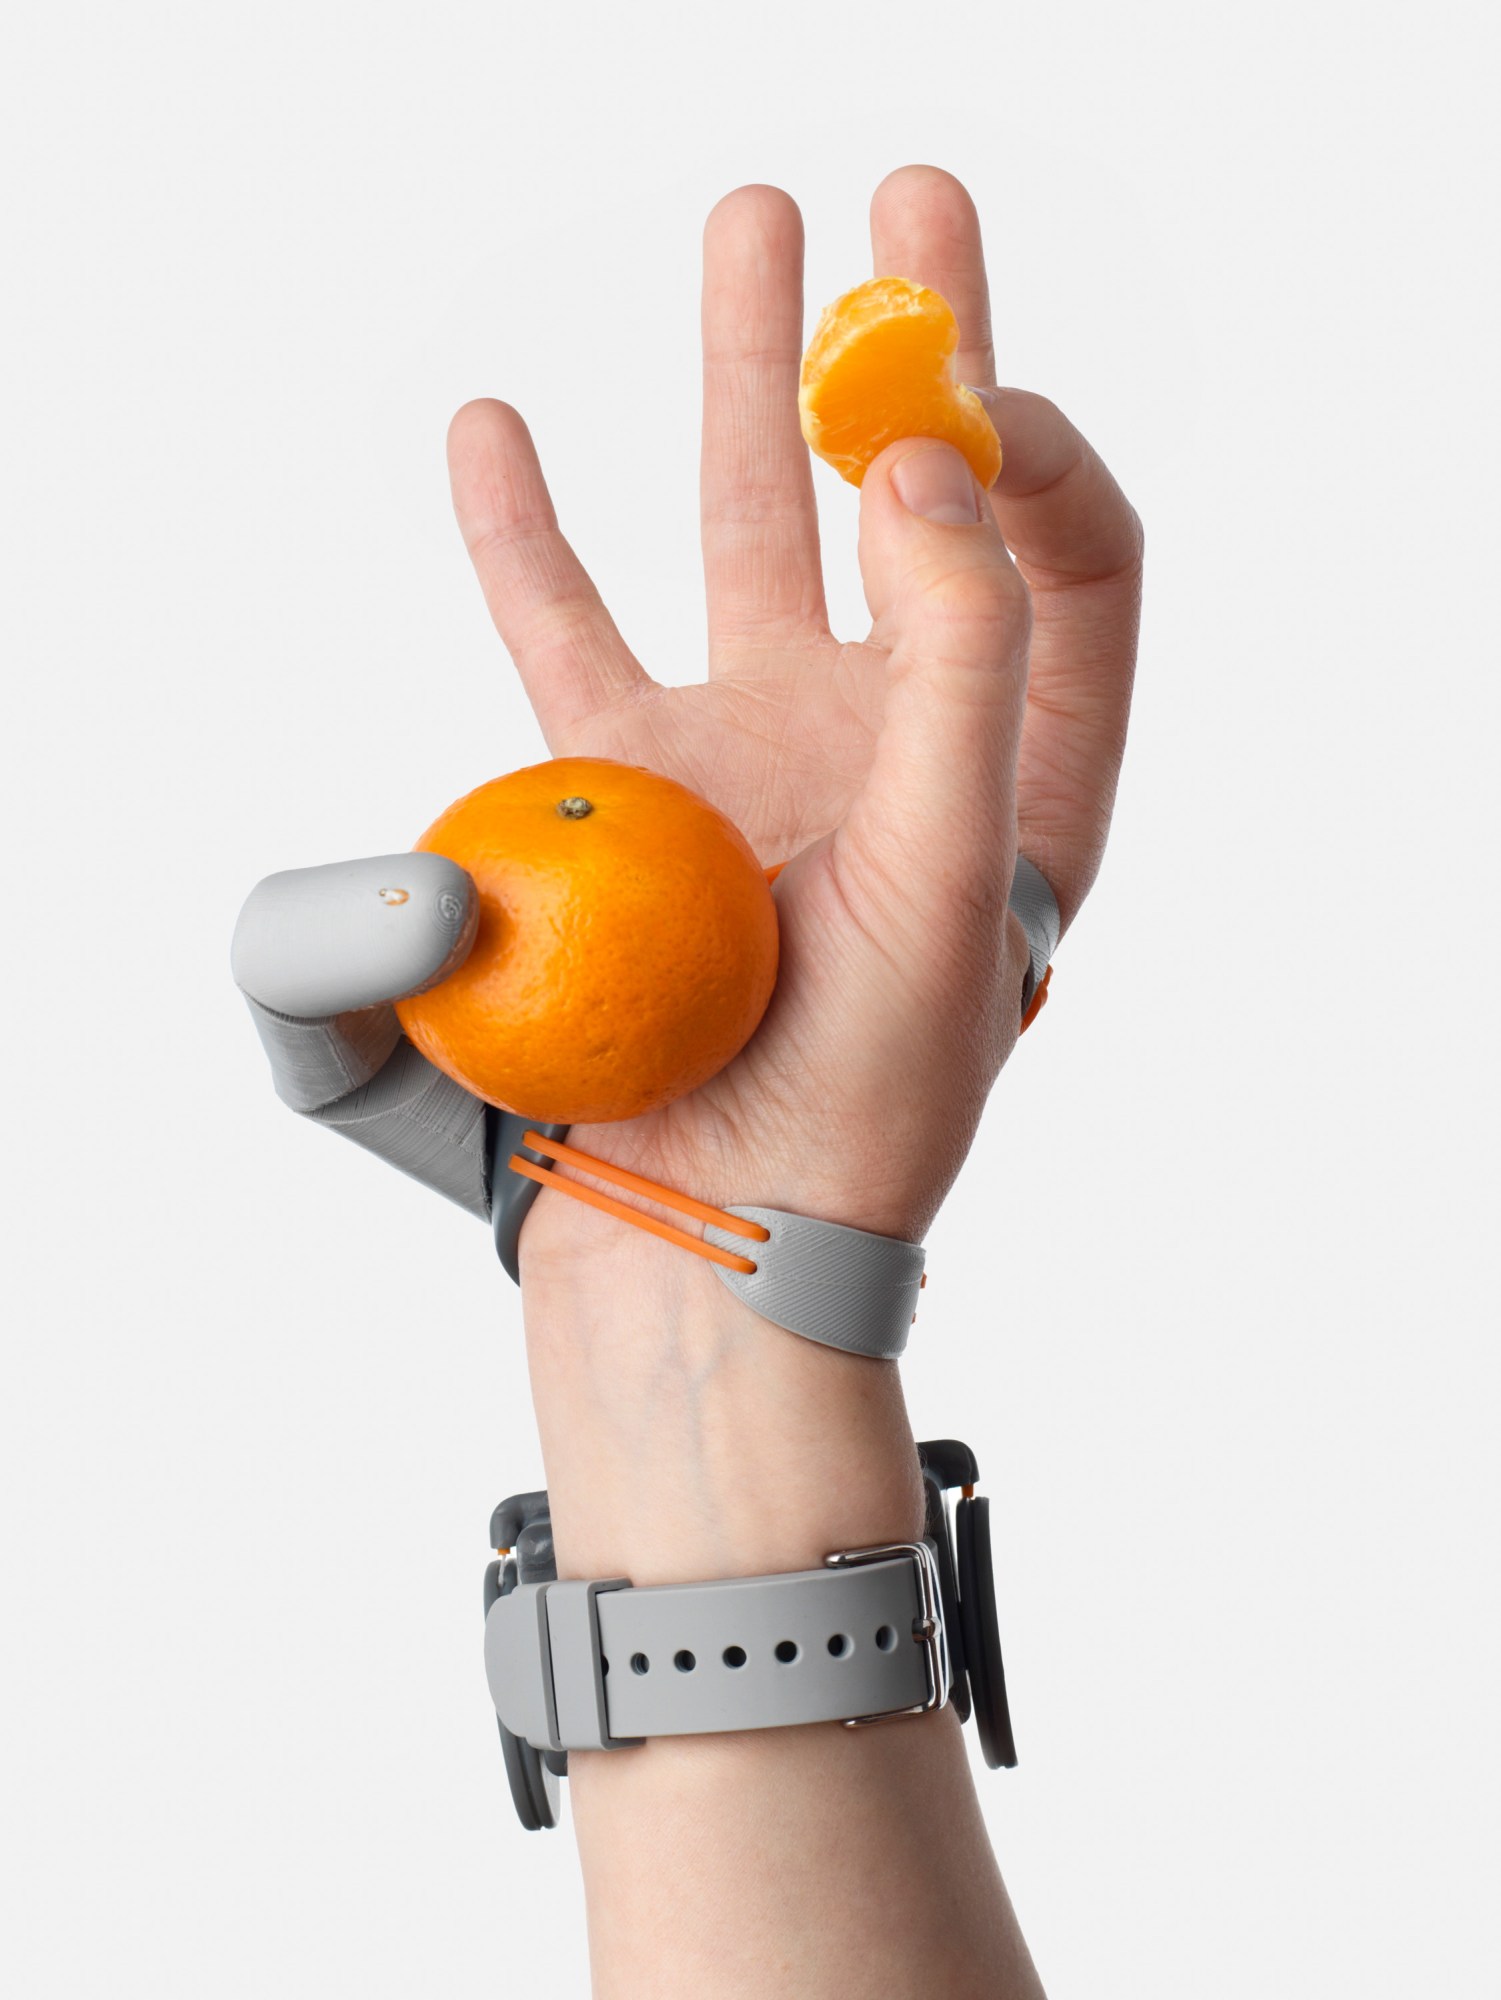 prosthetic finger holds a clementine against the palm of a hand, while a single segment is held by the forefinger and thumb